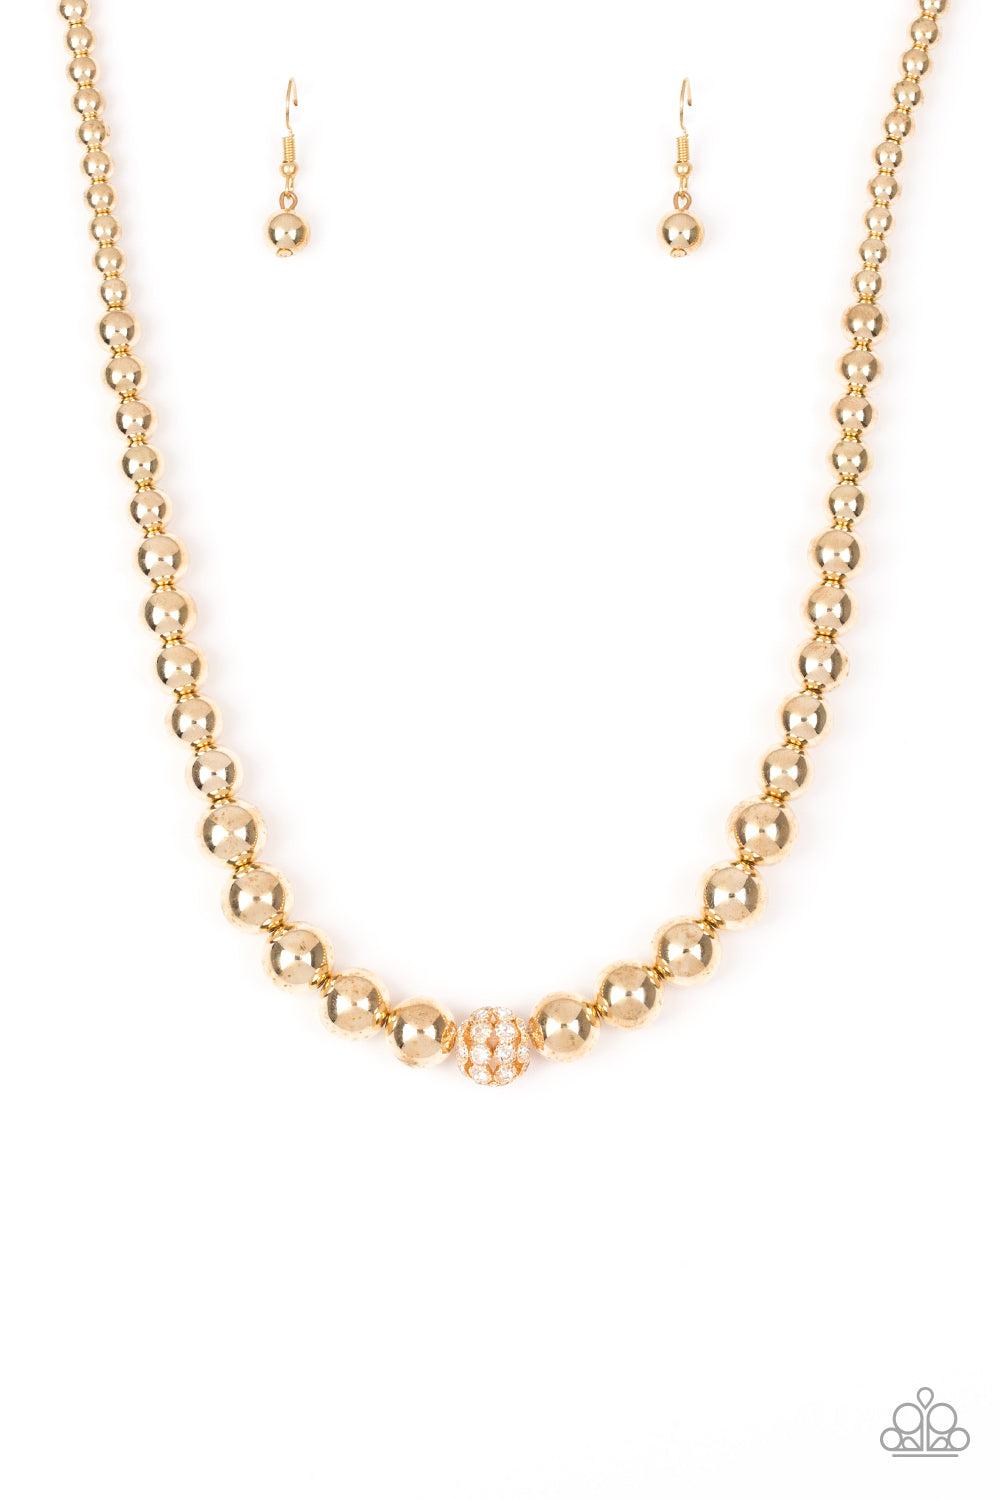 Paparazzi Accessories - High-Stakes FAME #N458 - Gold Necklace